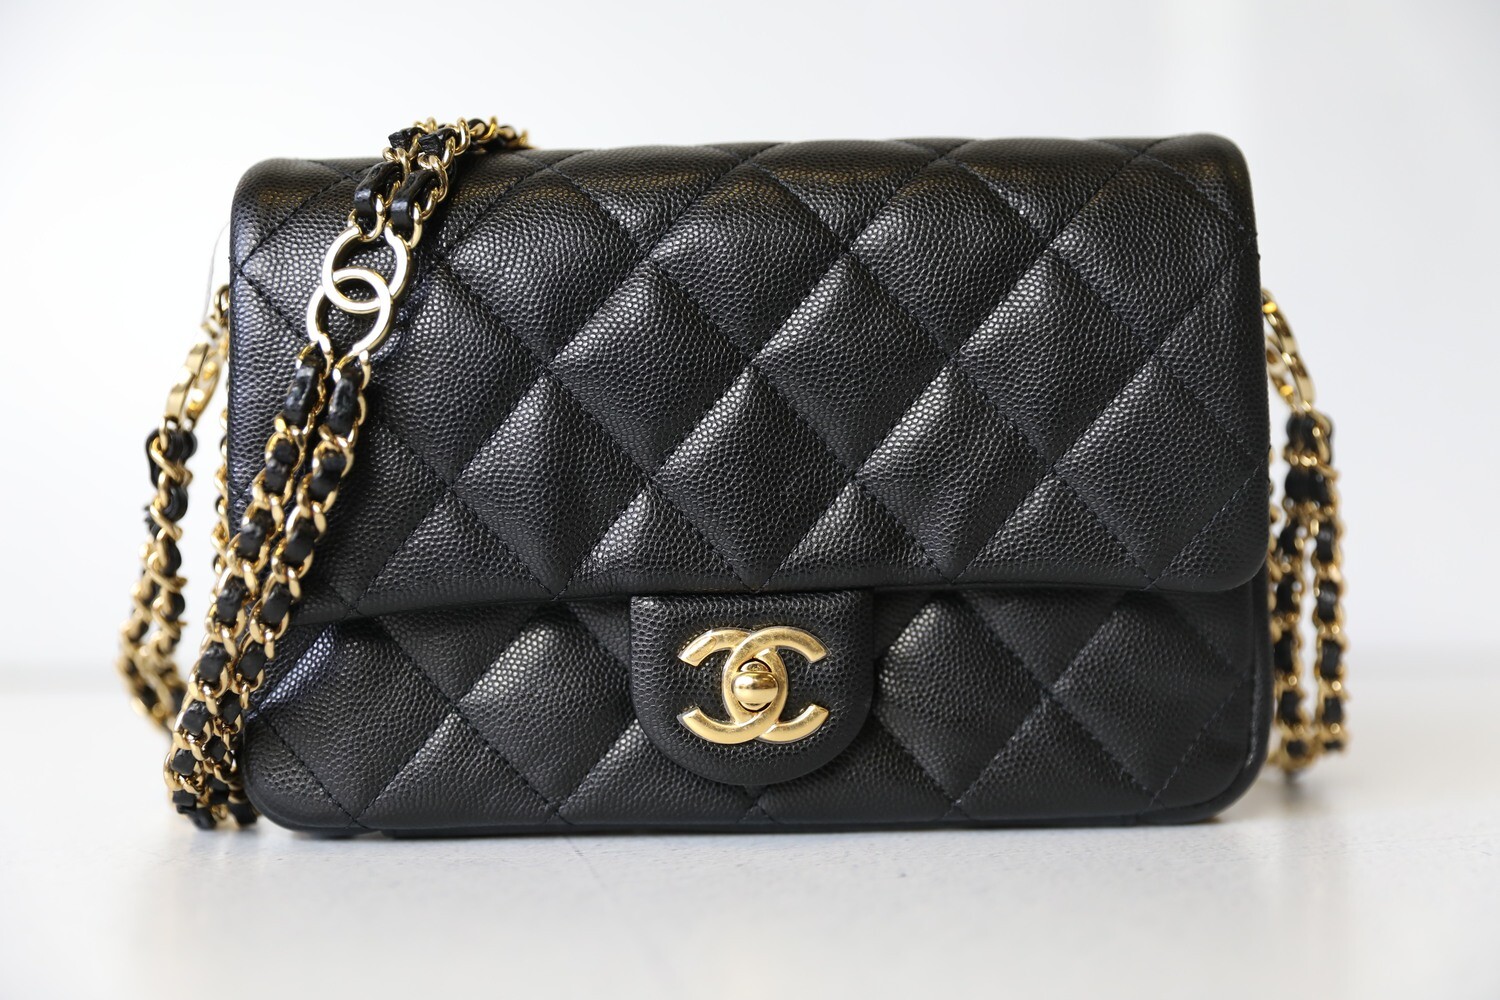 CHANEL Caviar Quilted Chain Soul Flap Black 1282829